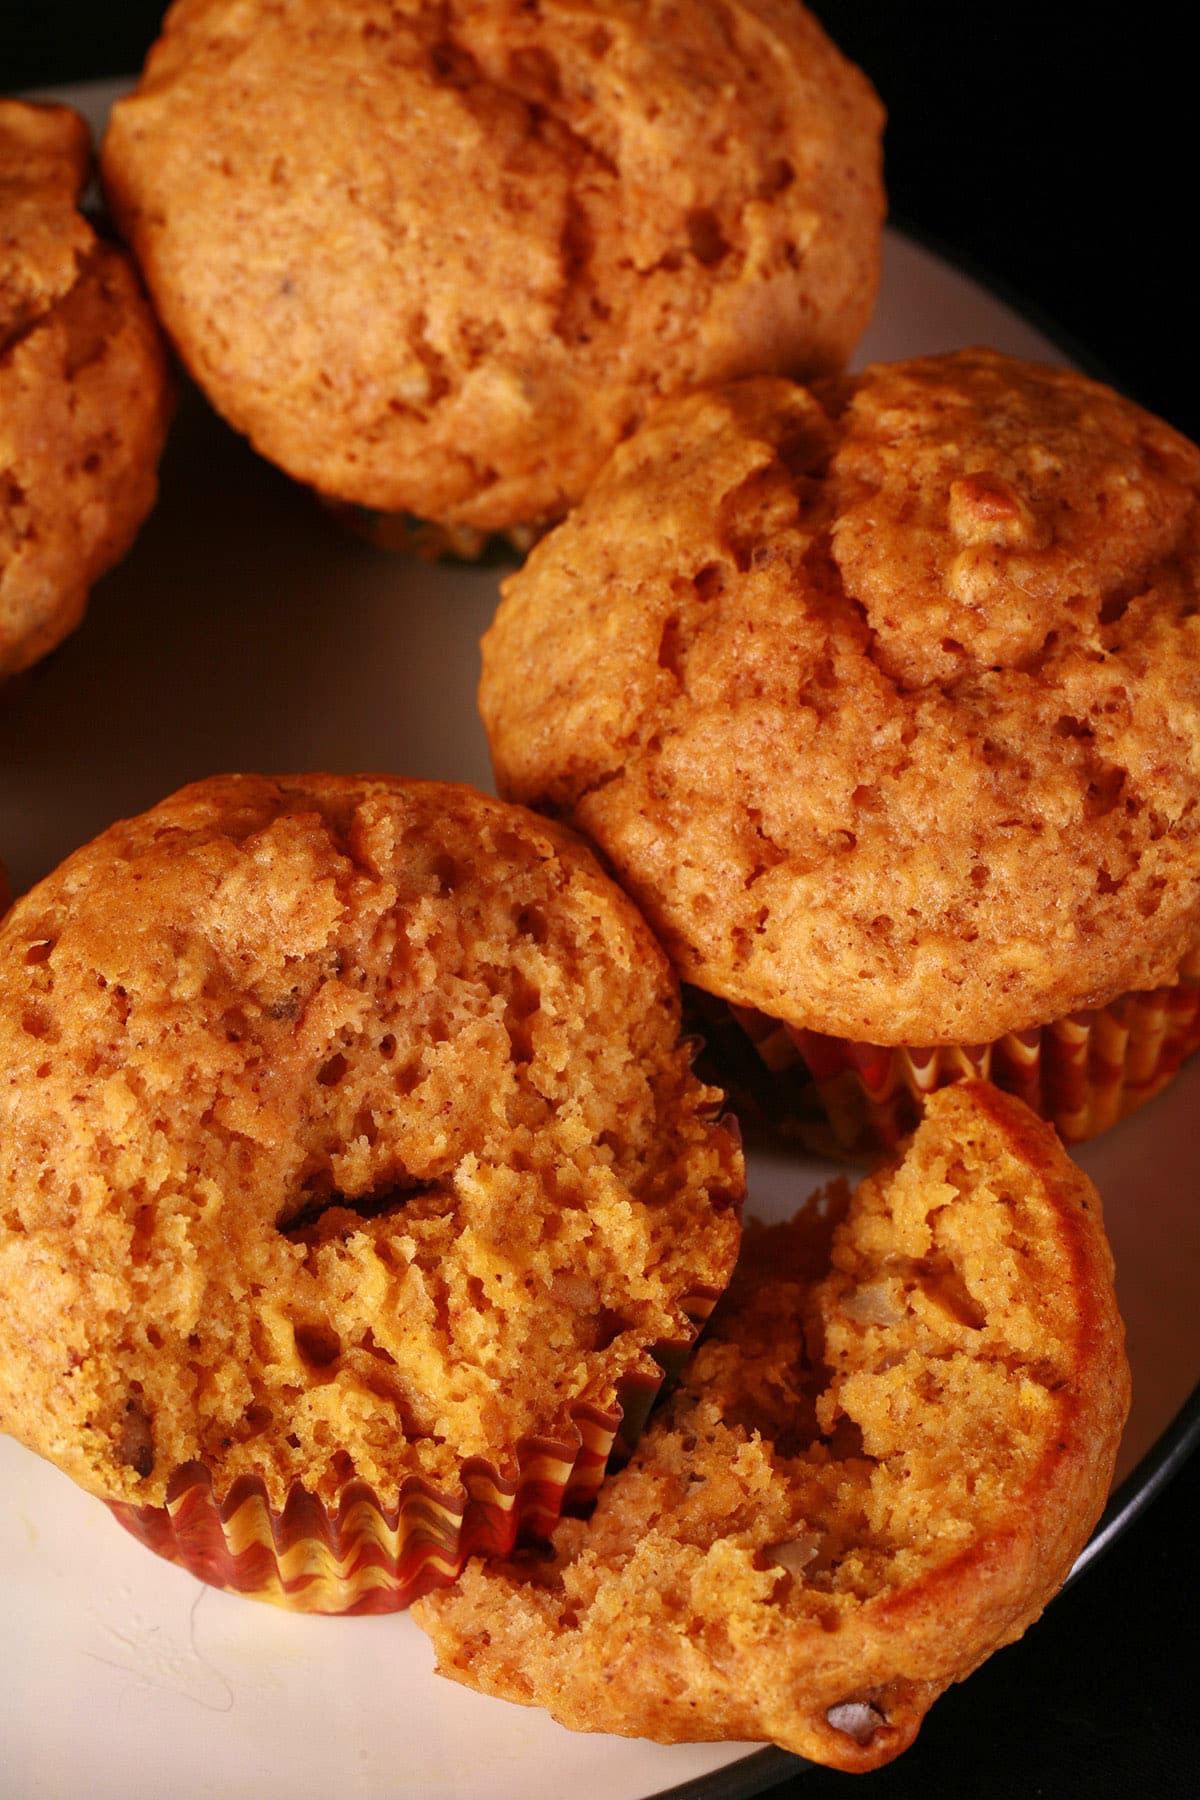 Several pumpkin spice muffins on a plate.